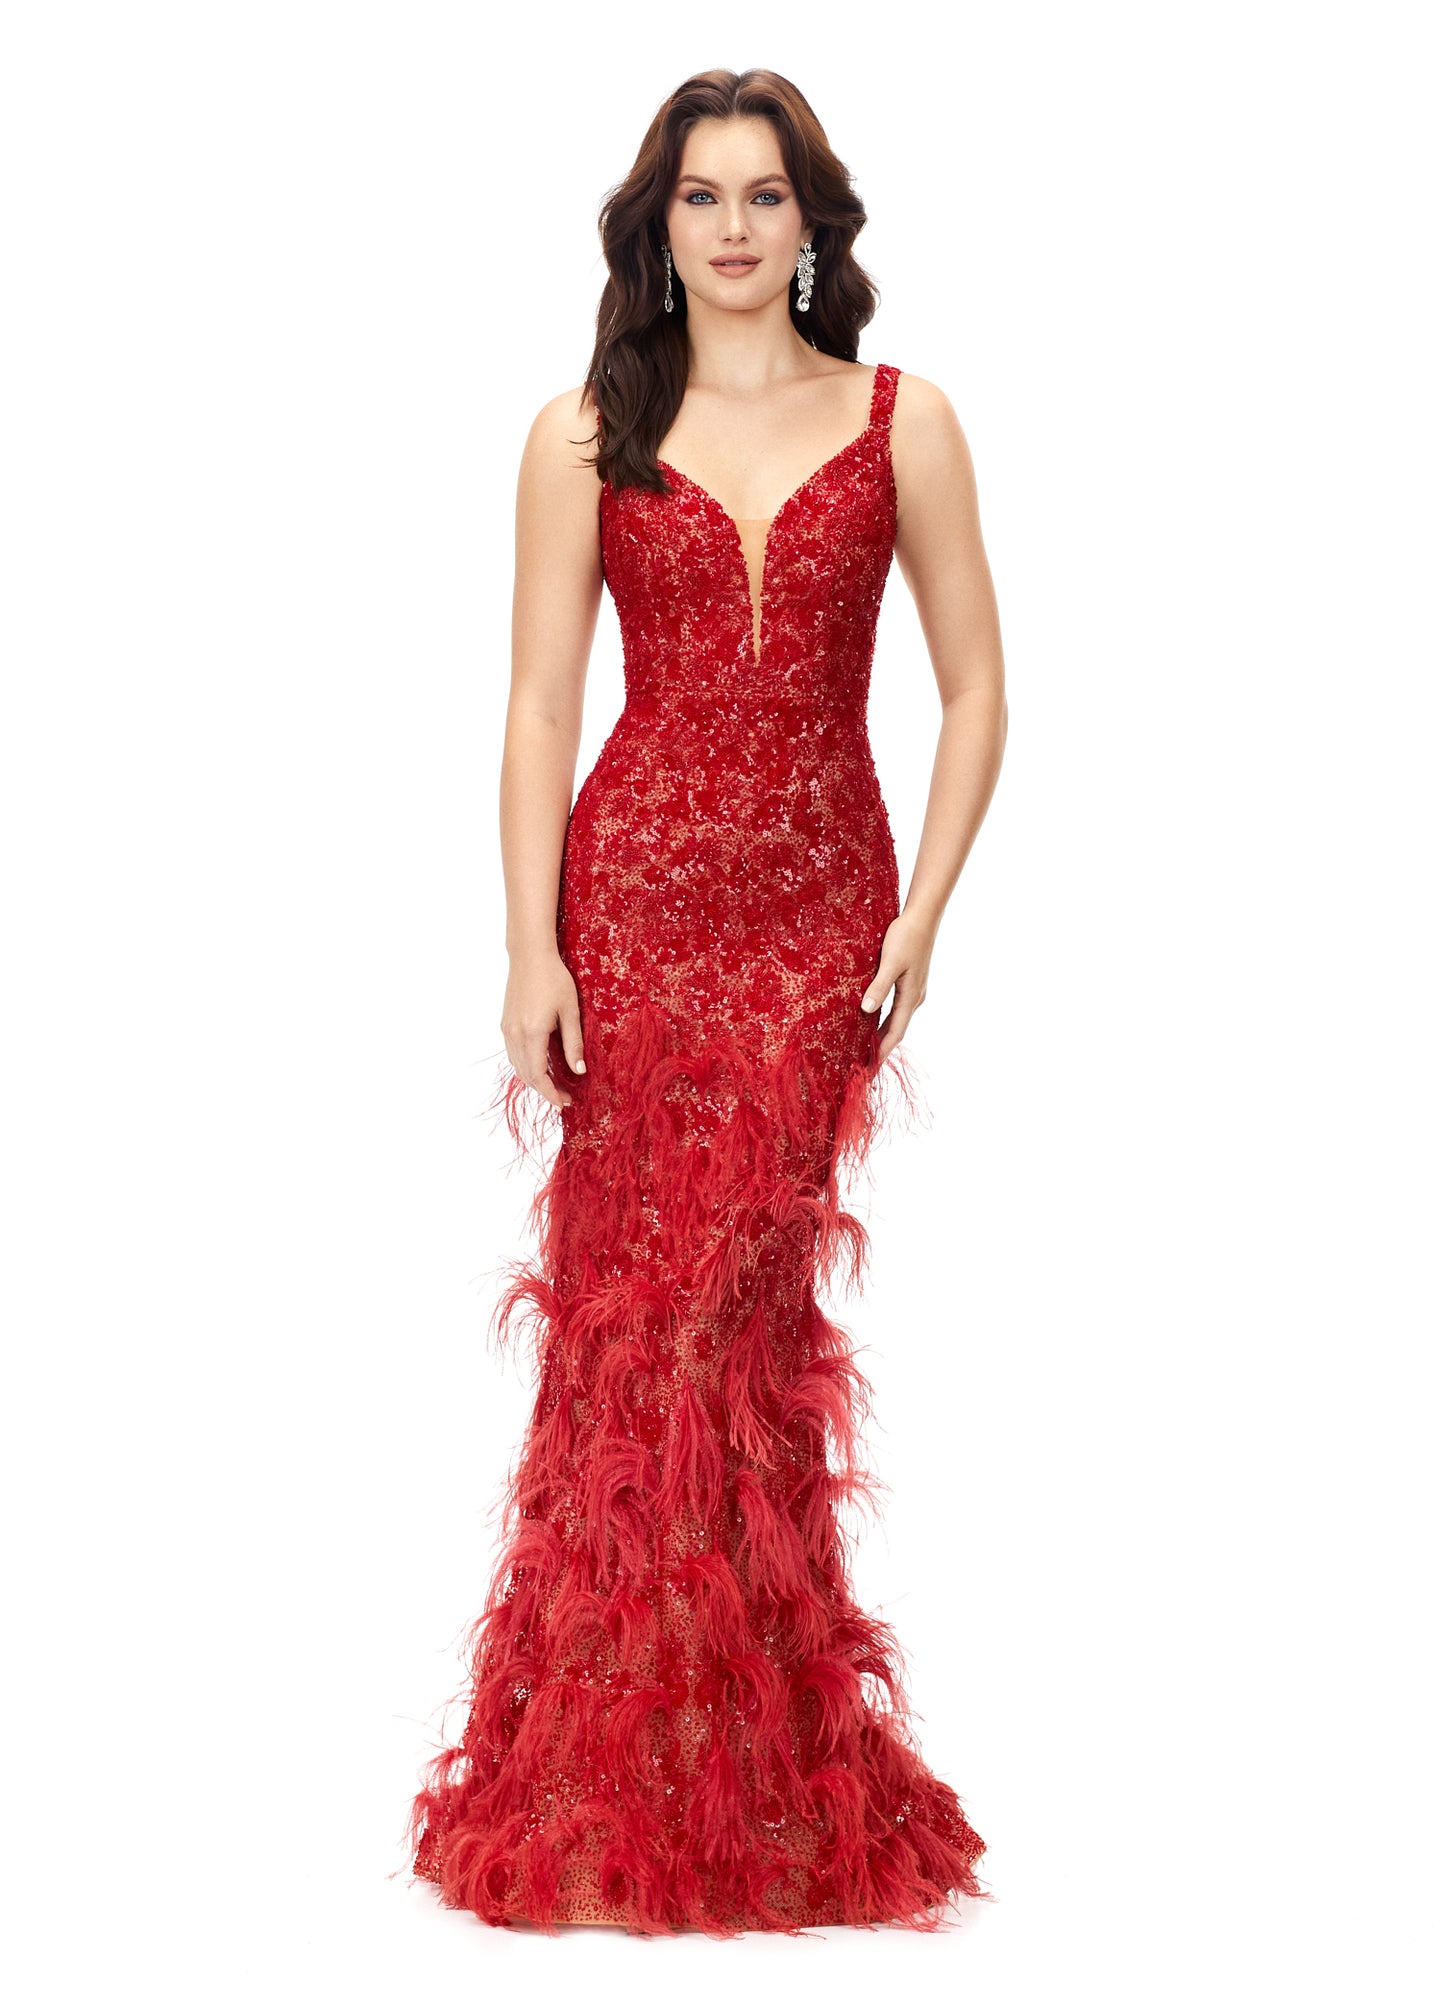 Ashley Lauren 11279 This gorgeous fitted gown features a deep illusion v-neckline and stunning beadwork throughout the entire dress. The look is complete with clusters of feathers throughout the skirt. V-Neckline Fitted Silhouette Fully Hand Beaded Feather Accents COLOR  Red